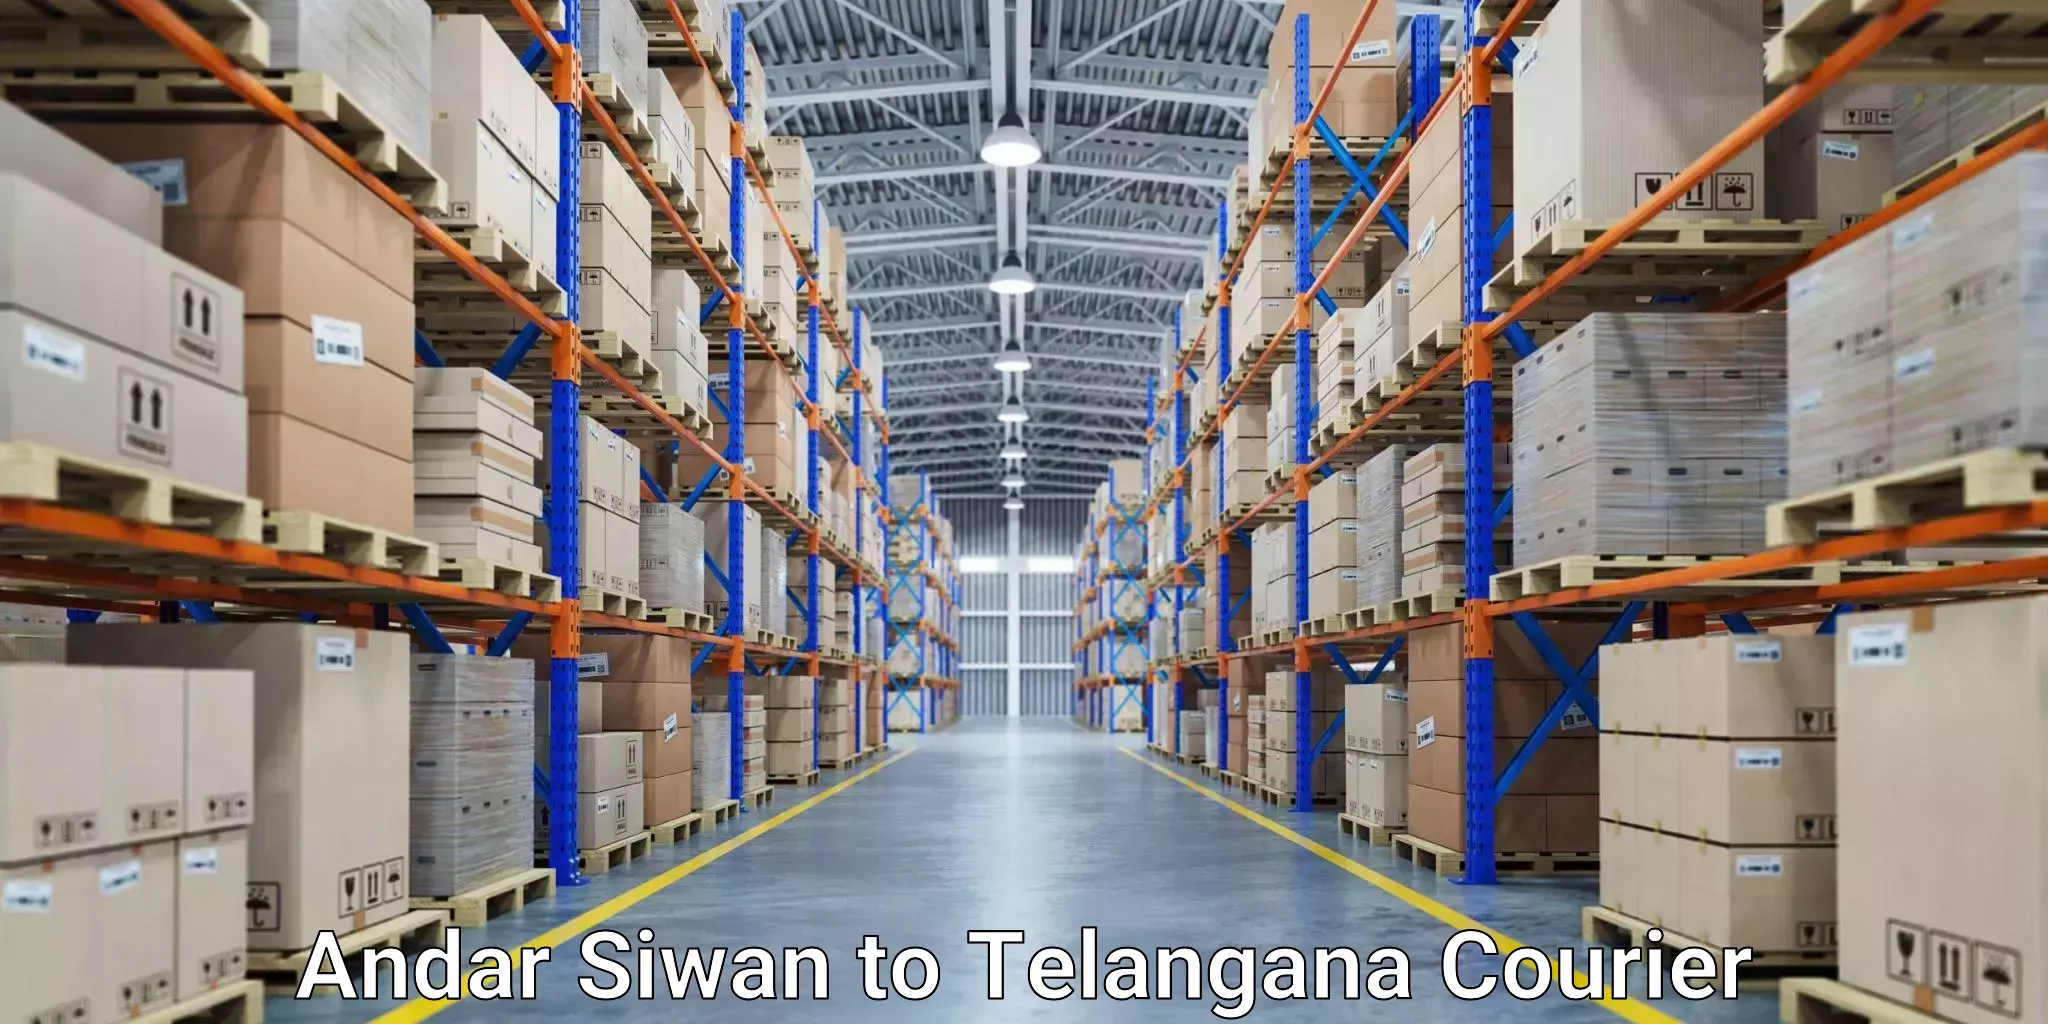 State-of-the-art courier technology Andar Siwan to Telangana